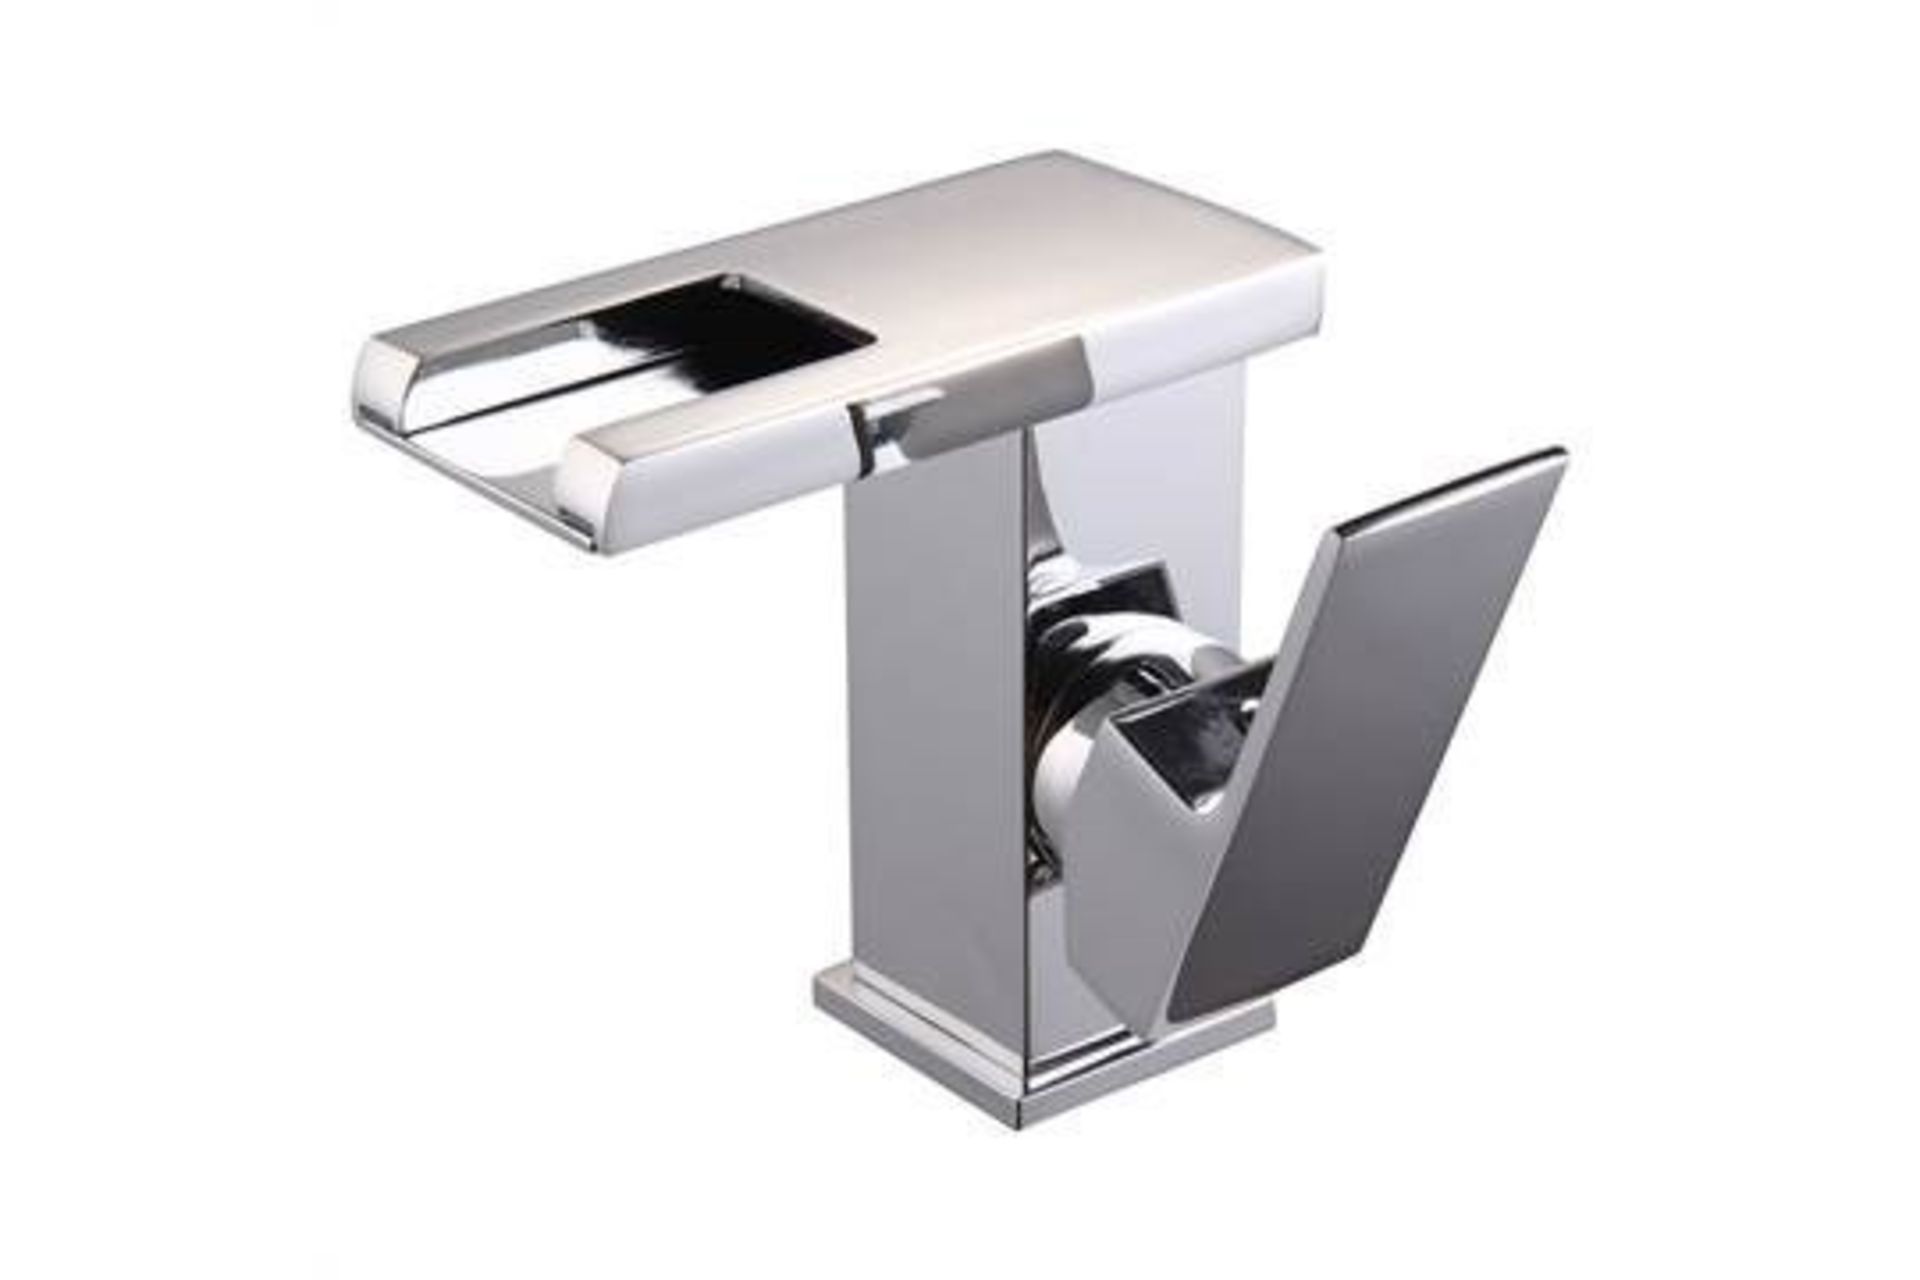 LED Waterfall Bathroom Basin Mixer Tap. RRP £229.99.Easy to install and clean. All copper ...LED LED - Image 2 of 2